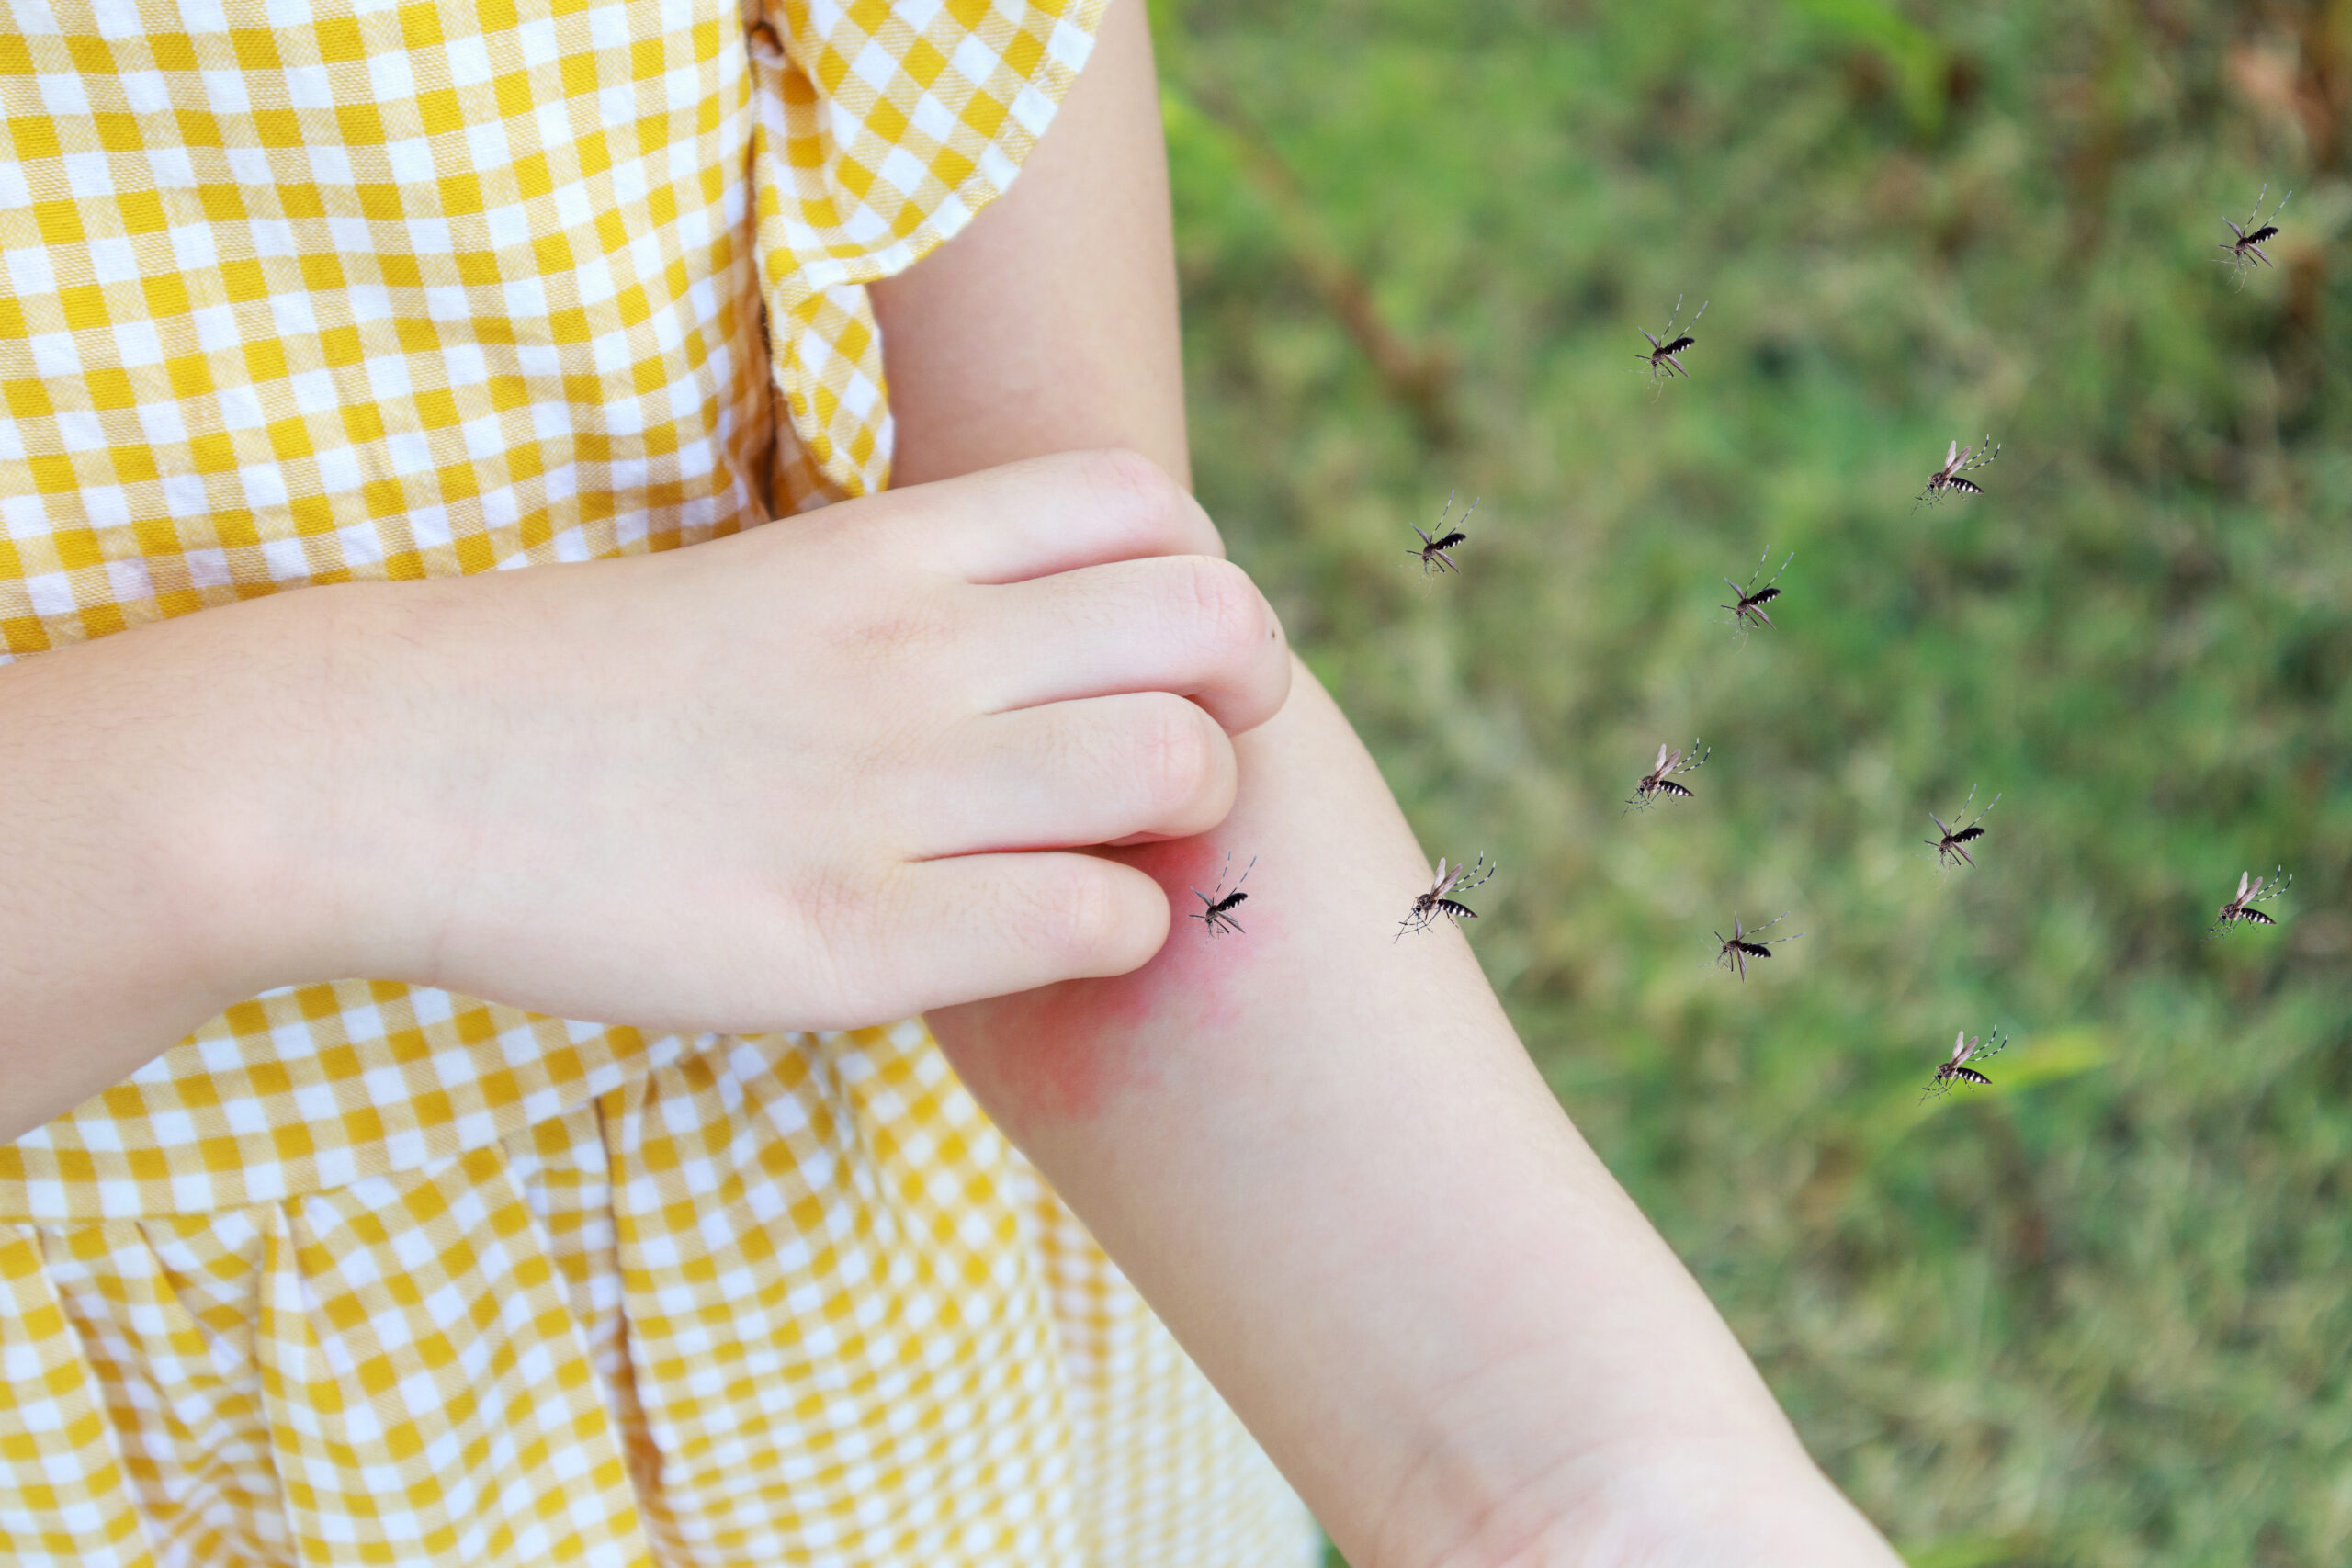 Little girl in yellow and white dress is scratching mosquito bites on her arm while a swarm of mosquitoes fly around